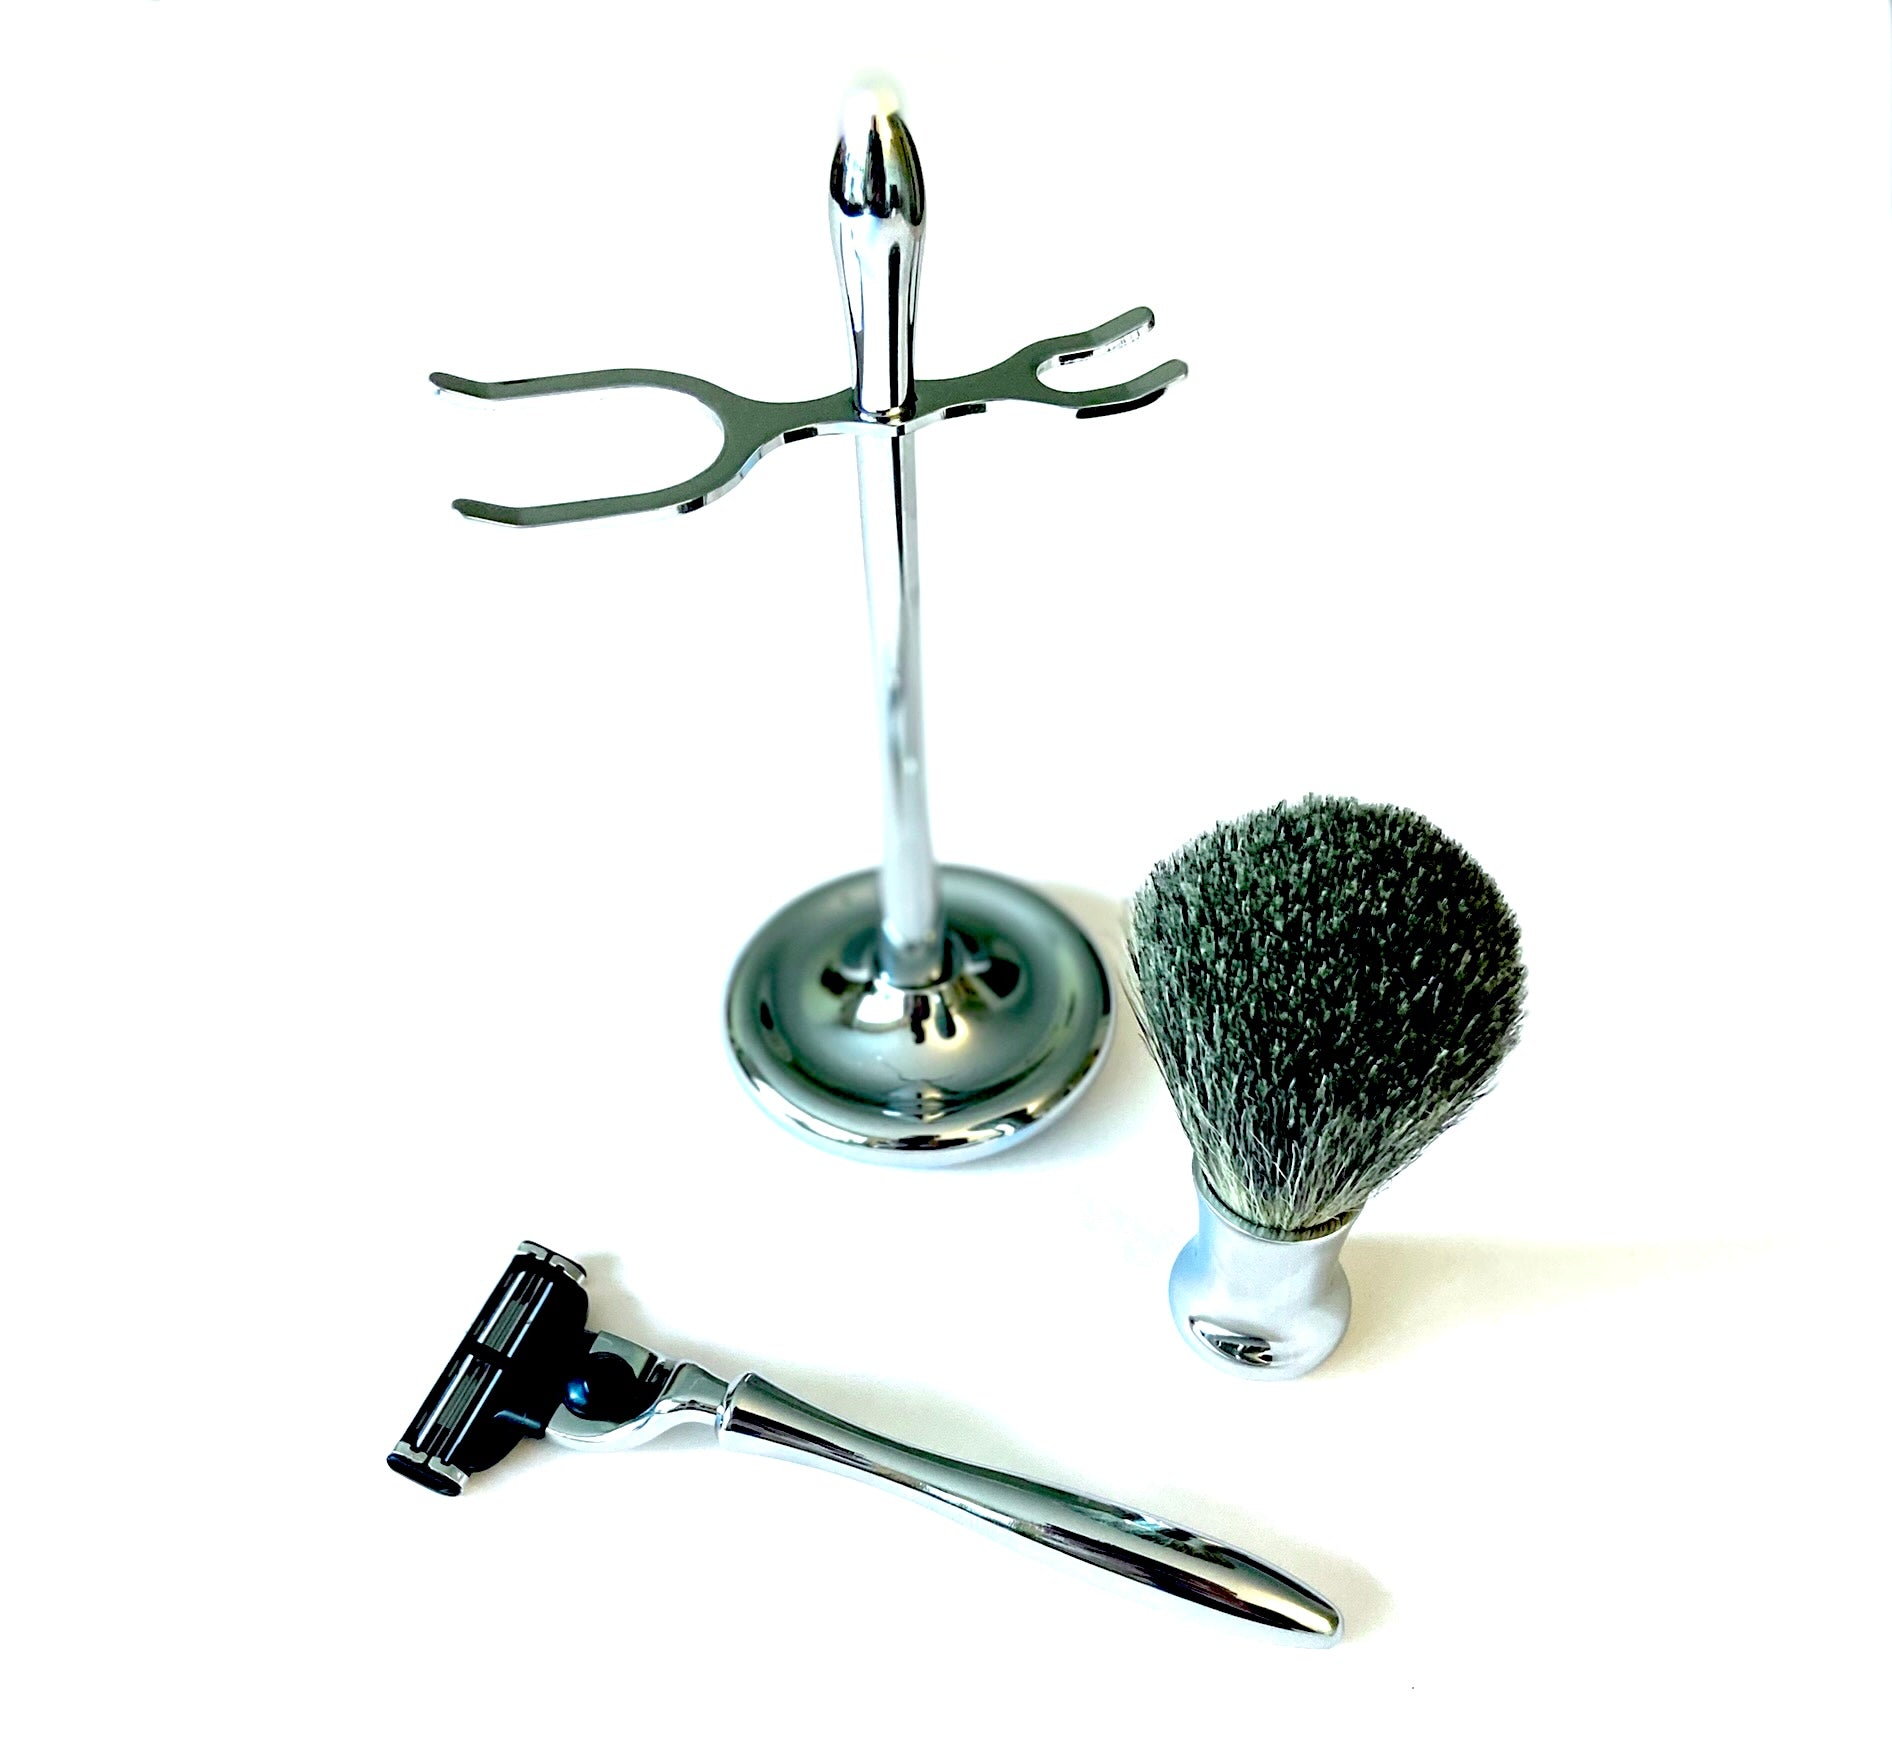 Metallic Reusable Razor with Shaving Brush - Attaches with Gillette line of Products